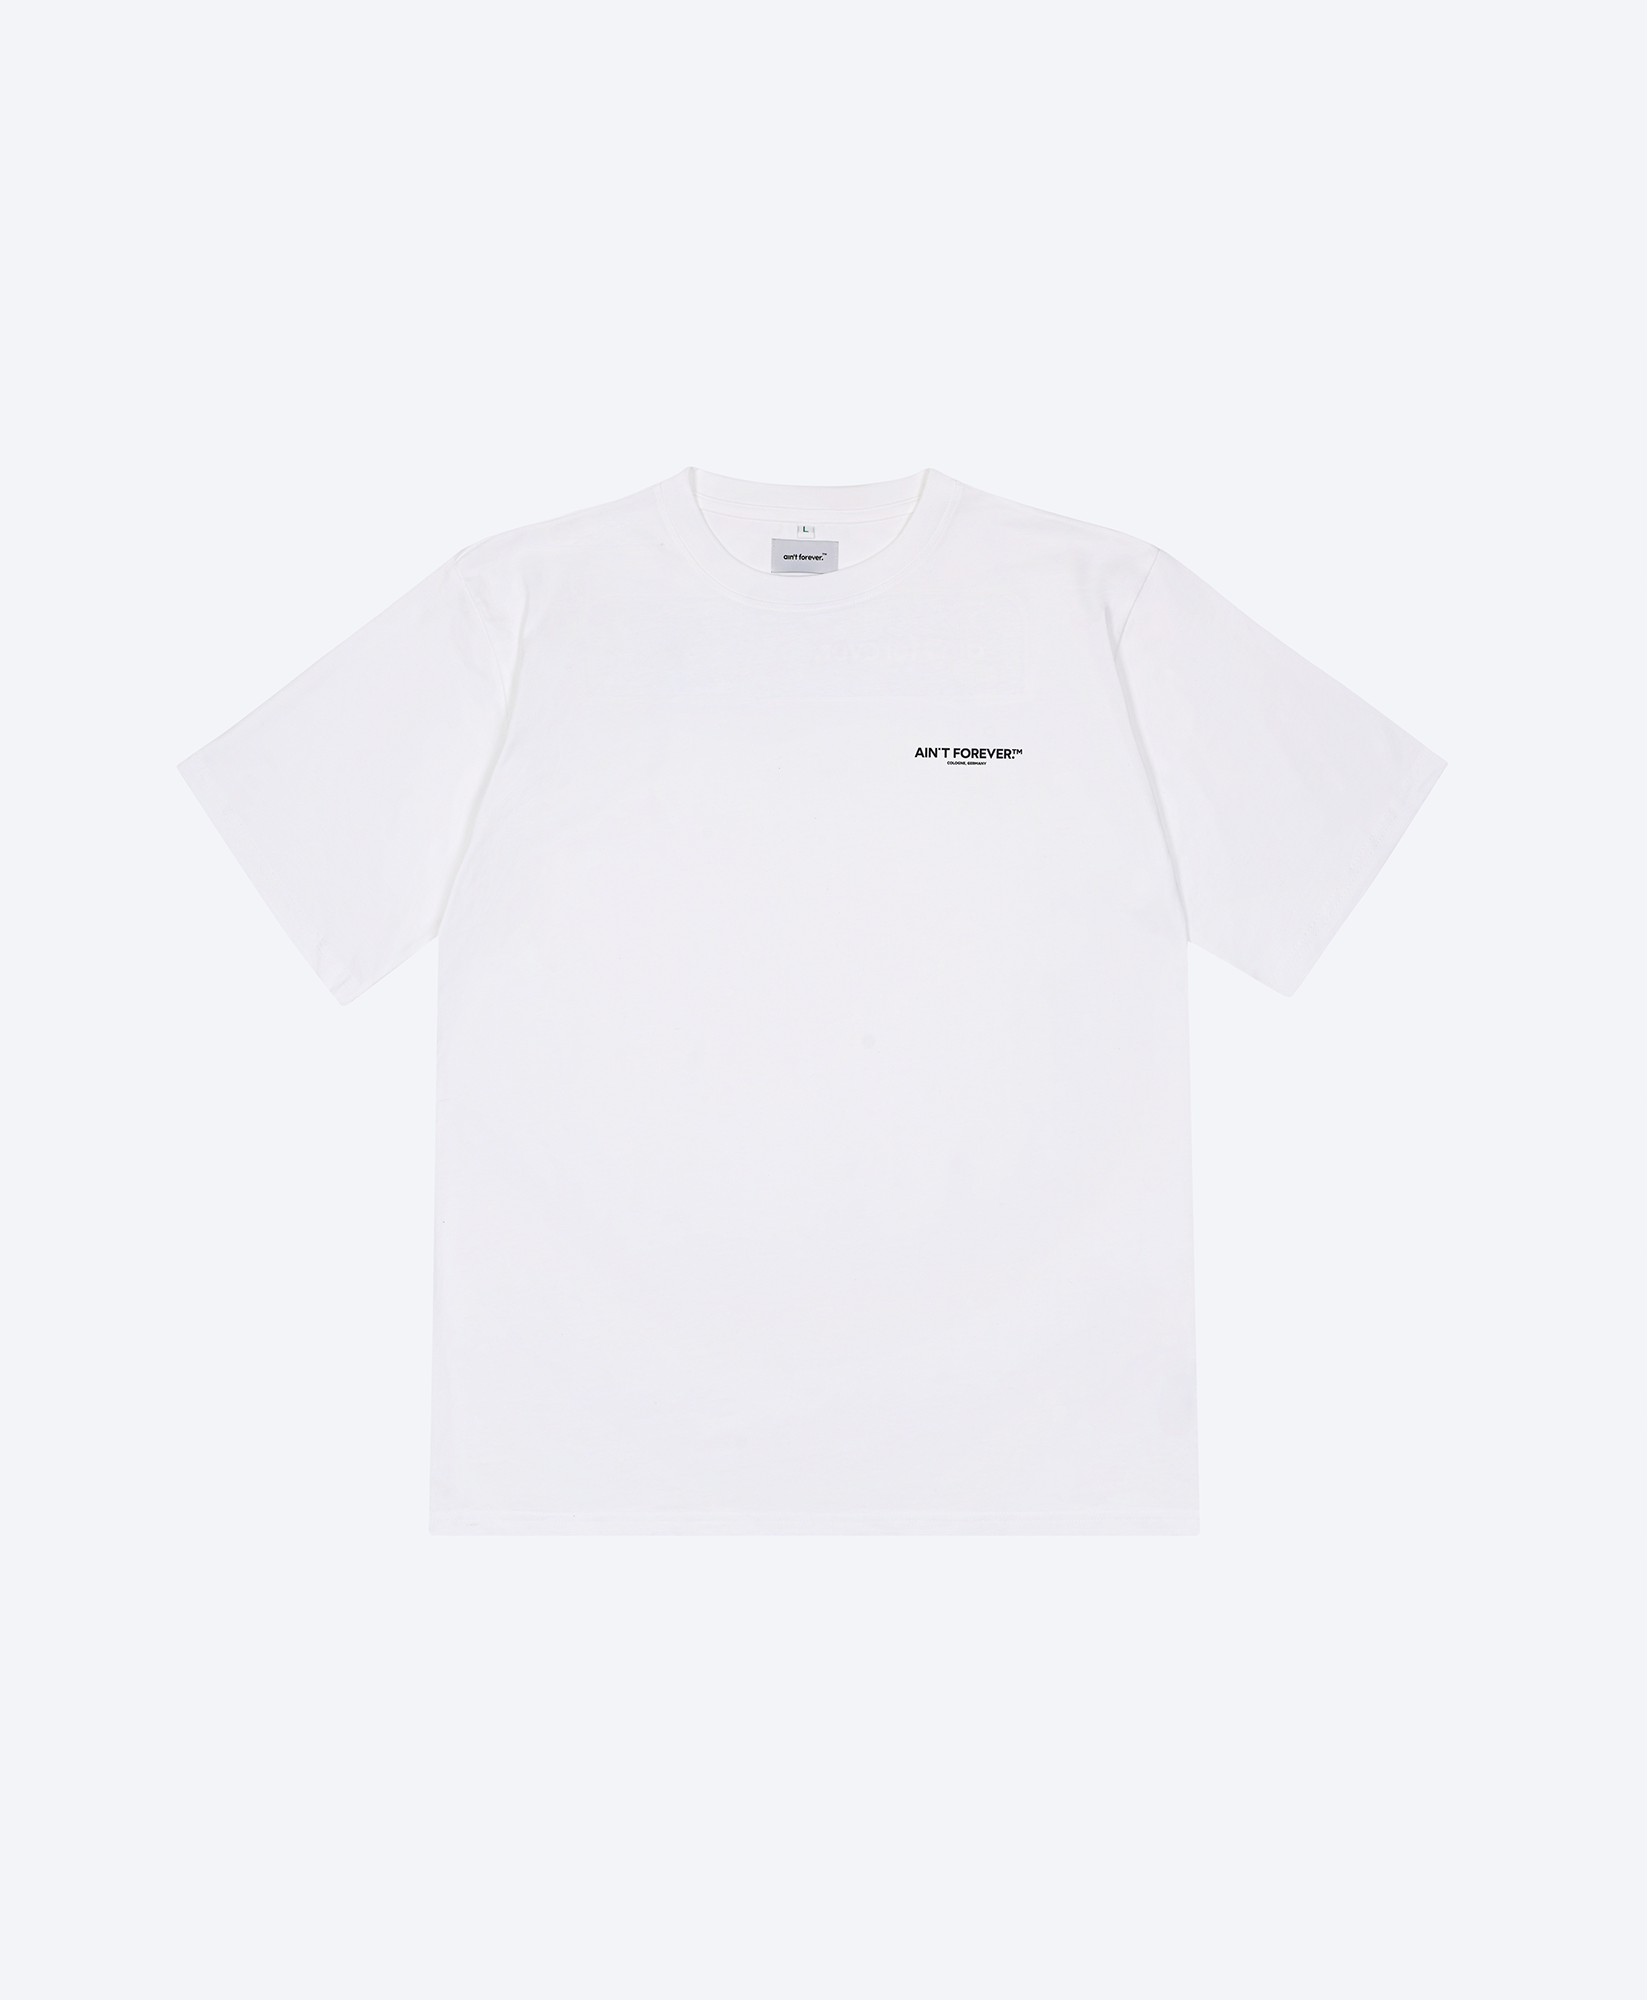 THE NIGHT OUT T-SHIRT (WHITE/BLACK)